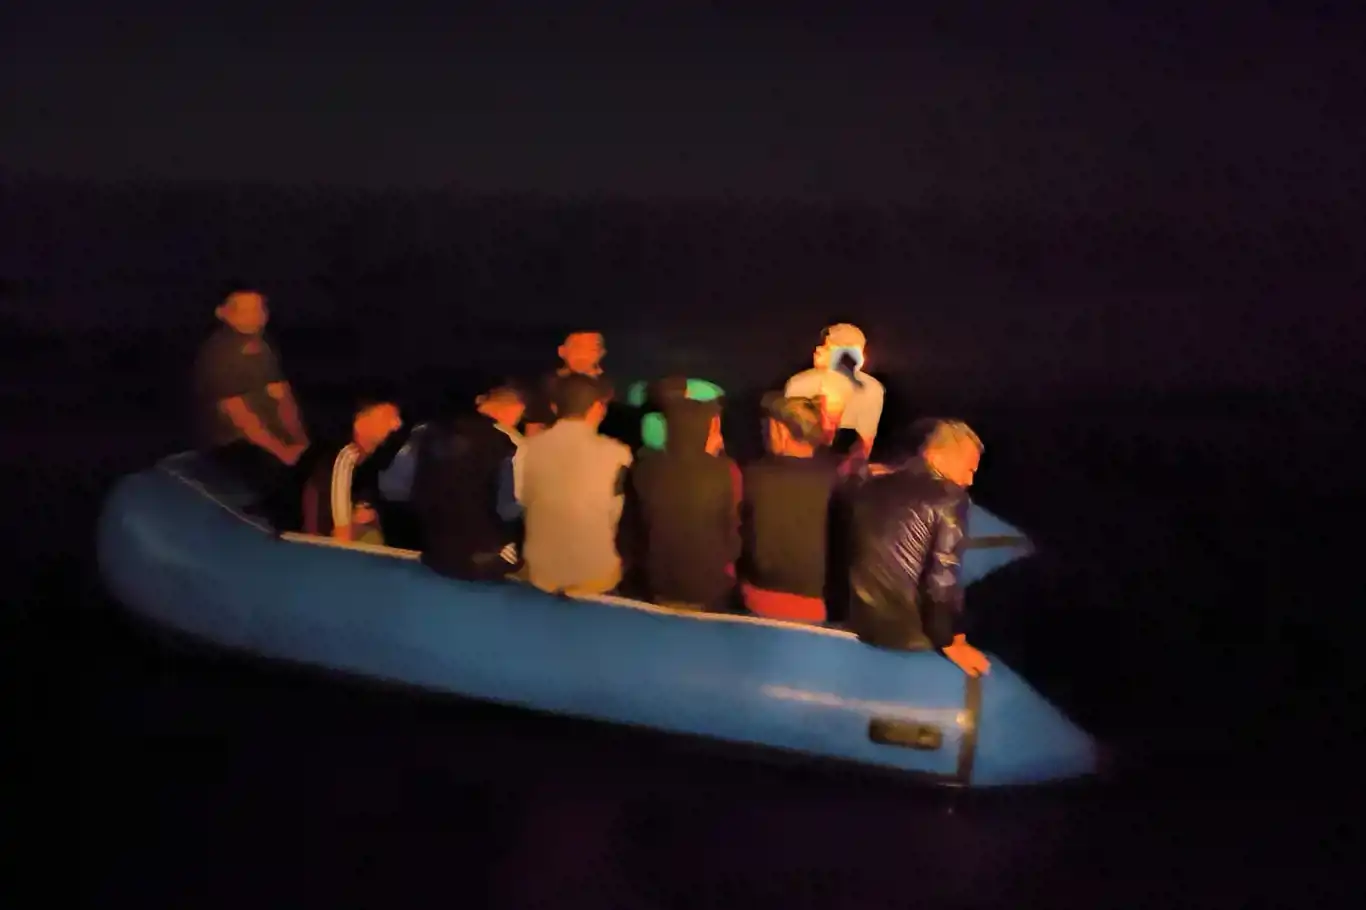 Turkish coast guard rescues 24 migrants pushed back by Greek forces